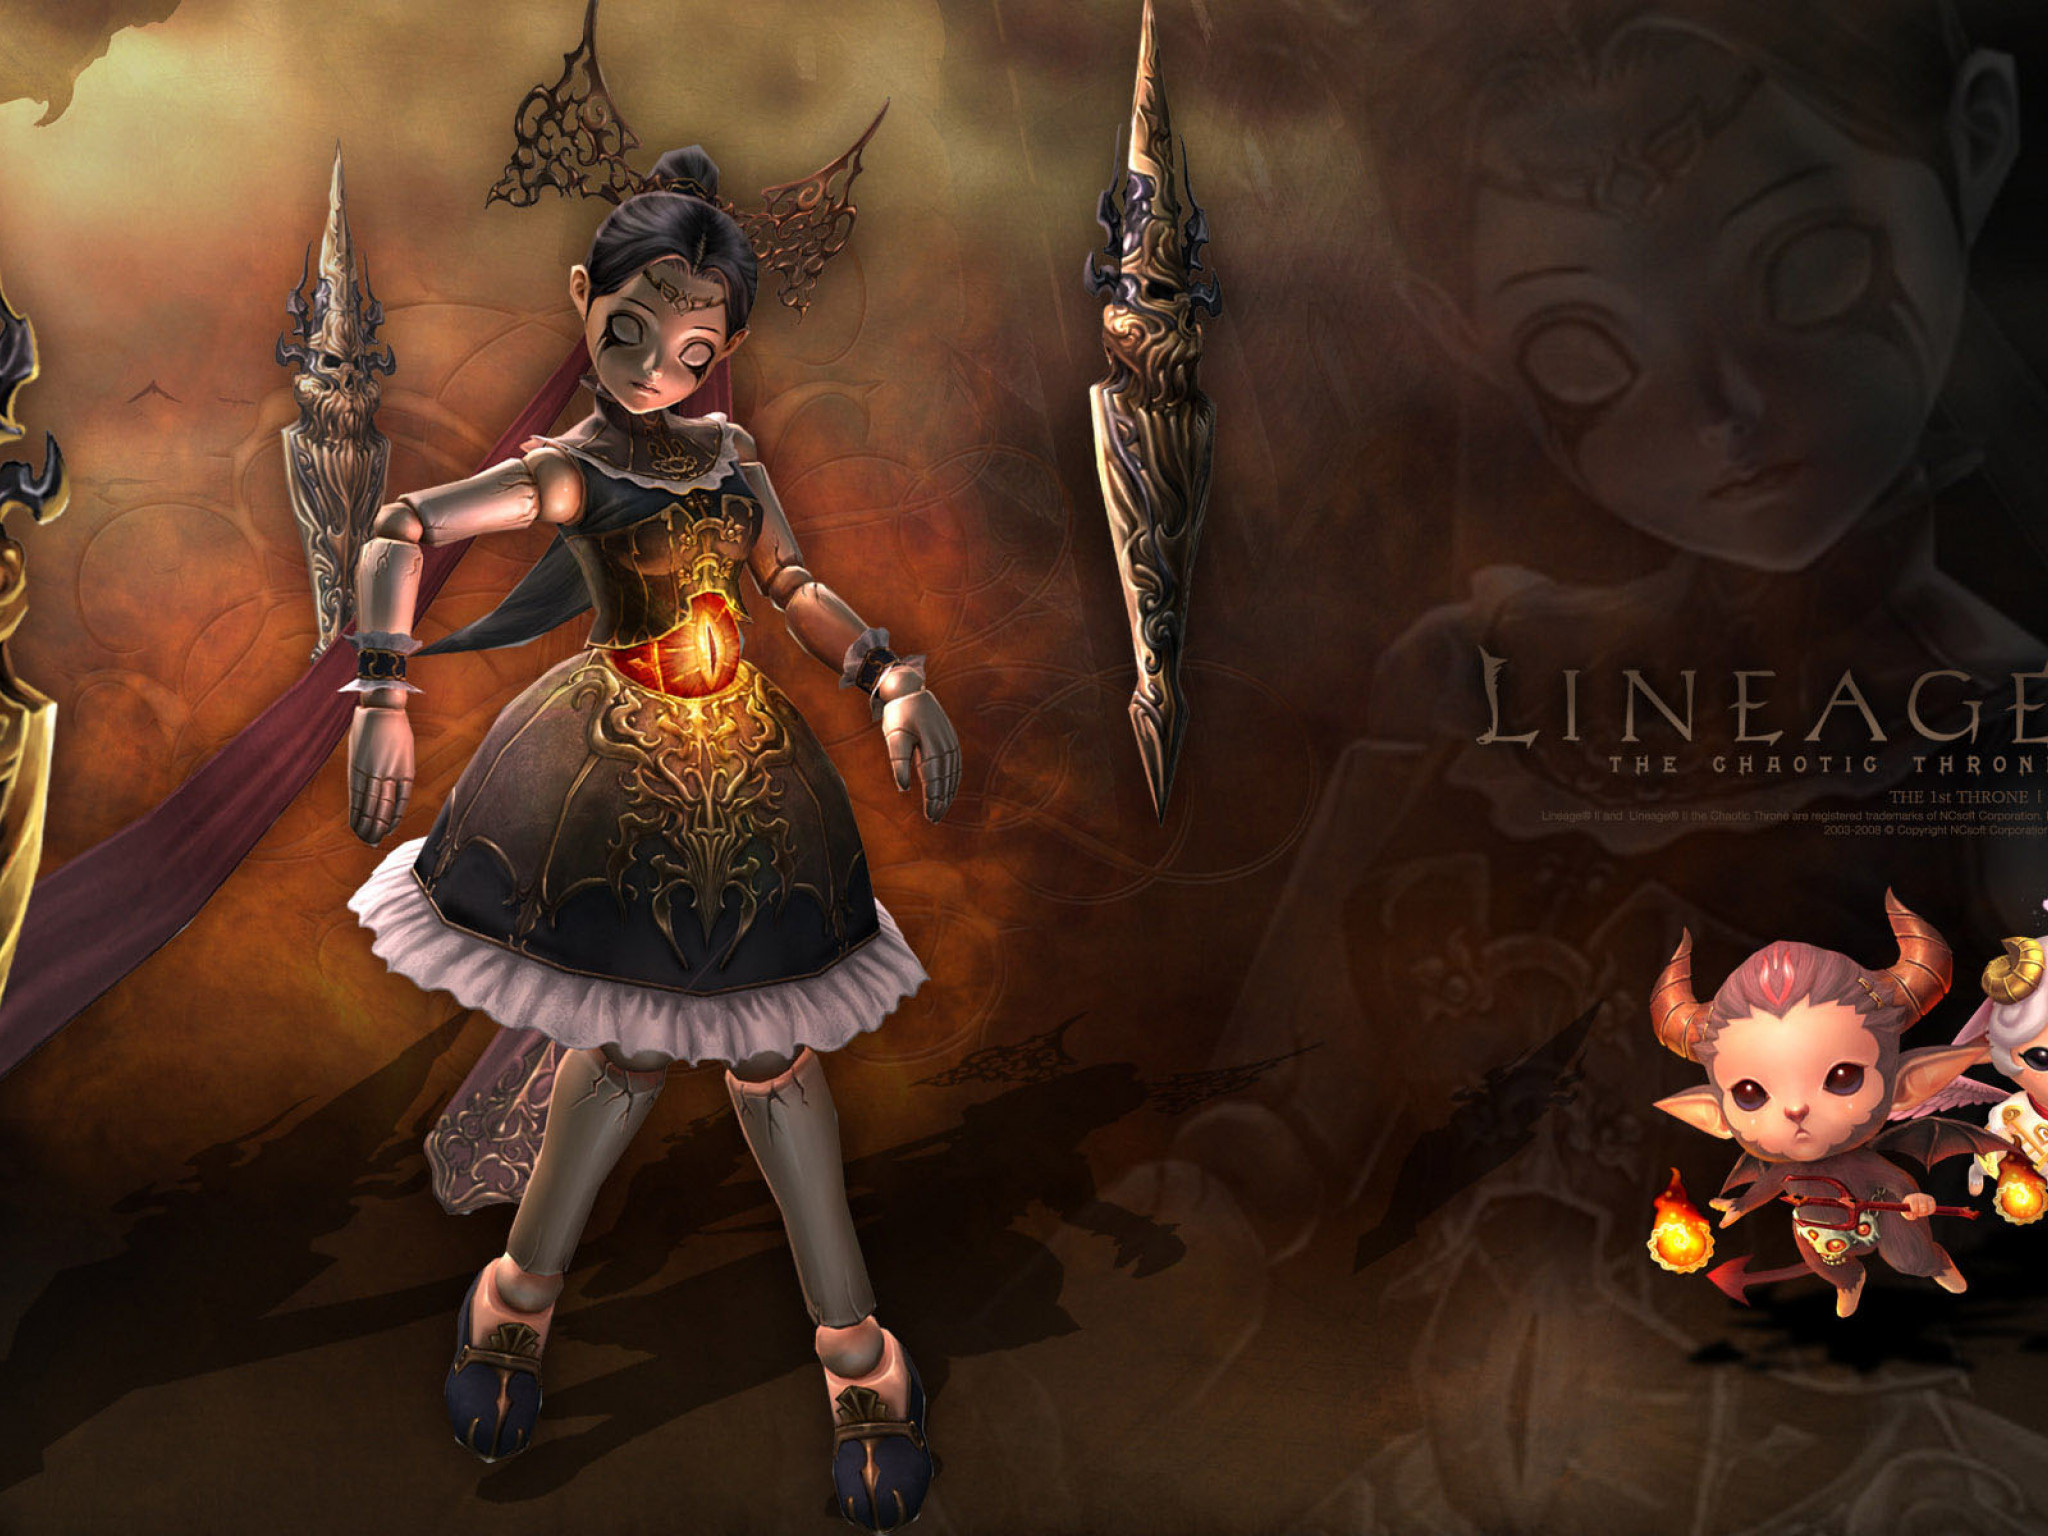 Lineage 22